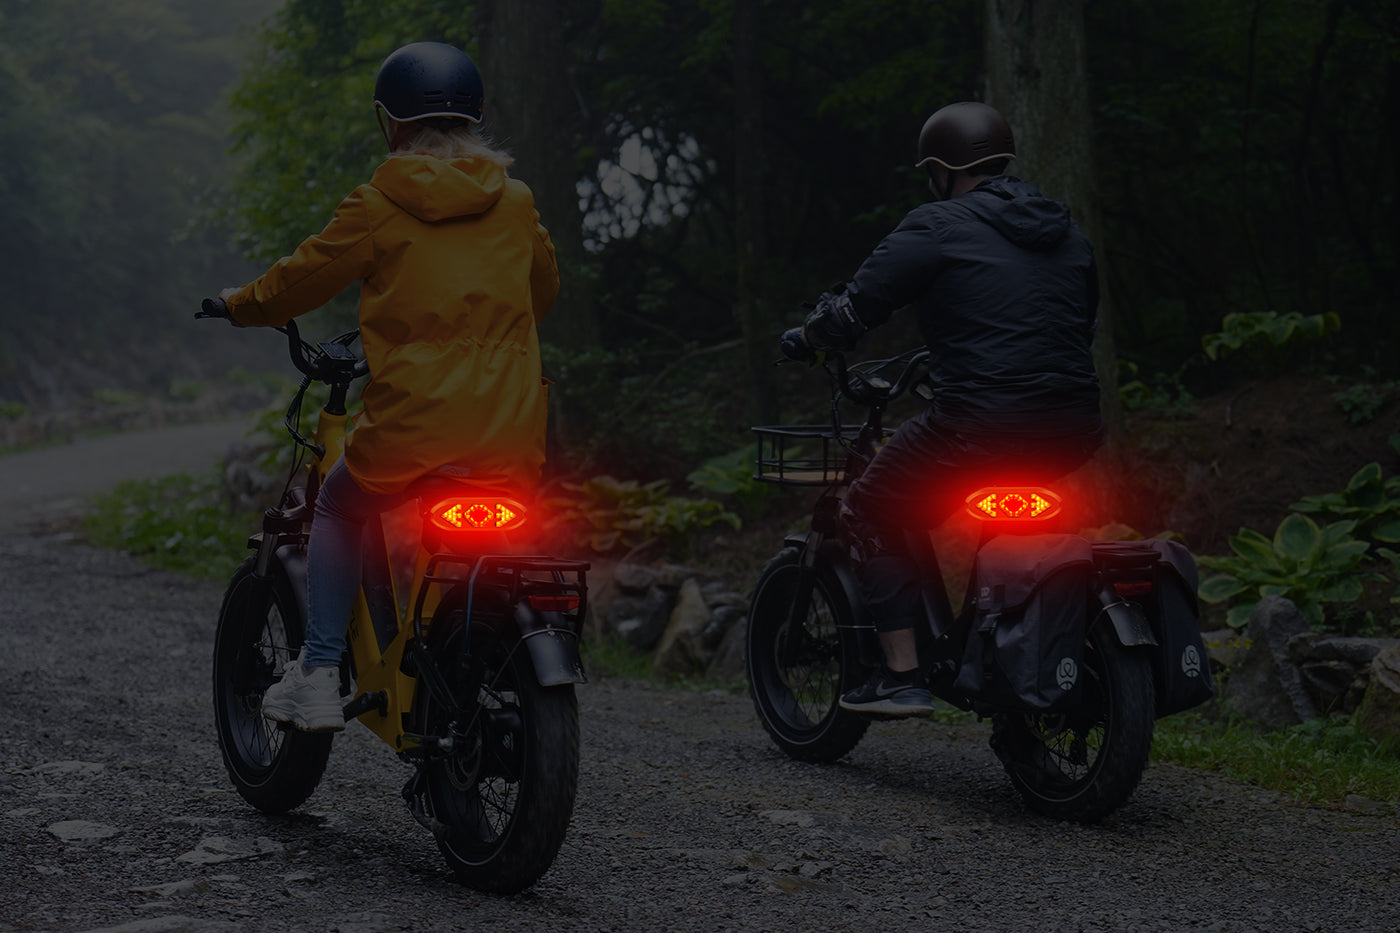 Ebike Tail Light with Turn Signals Wireless Remote Control Waterproof